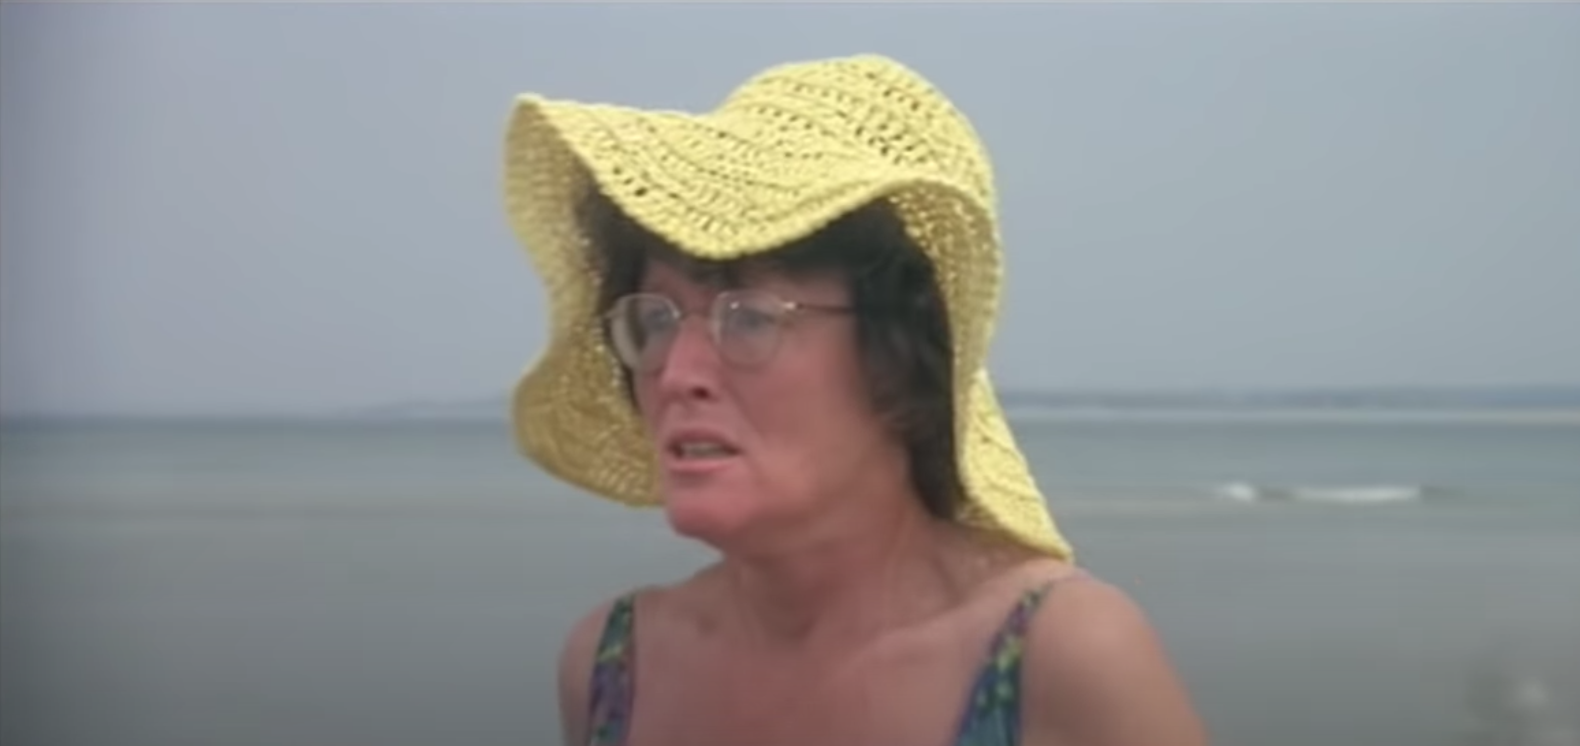 <p>On April 5, actress Lee Fierro -- best known as Mrs. Kintner in the "Jaws" film franchise -- passed away from complications of the coronavirus. She was 91.</p>